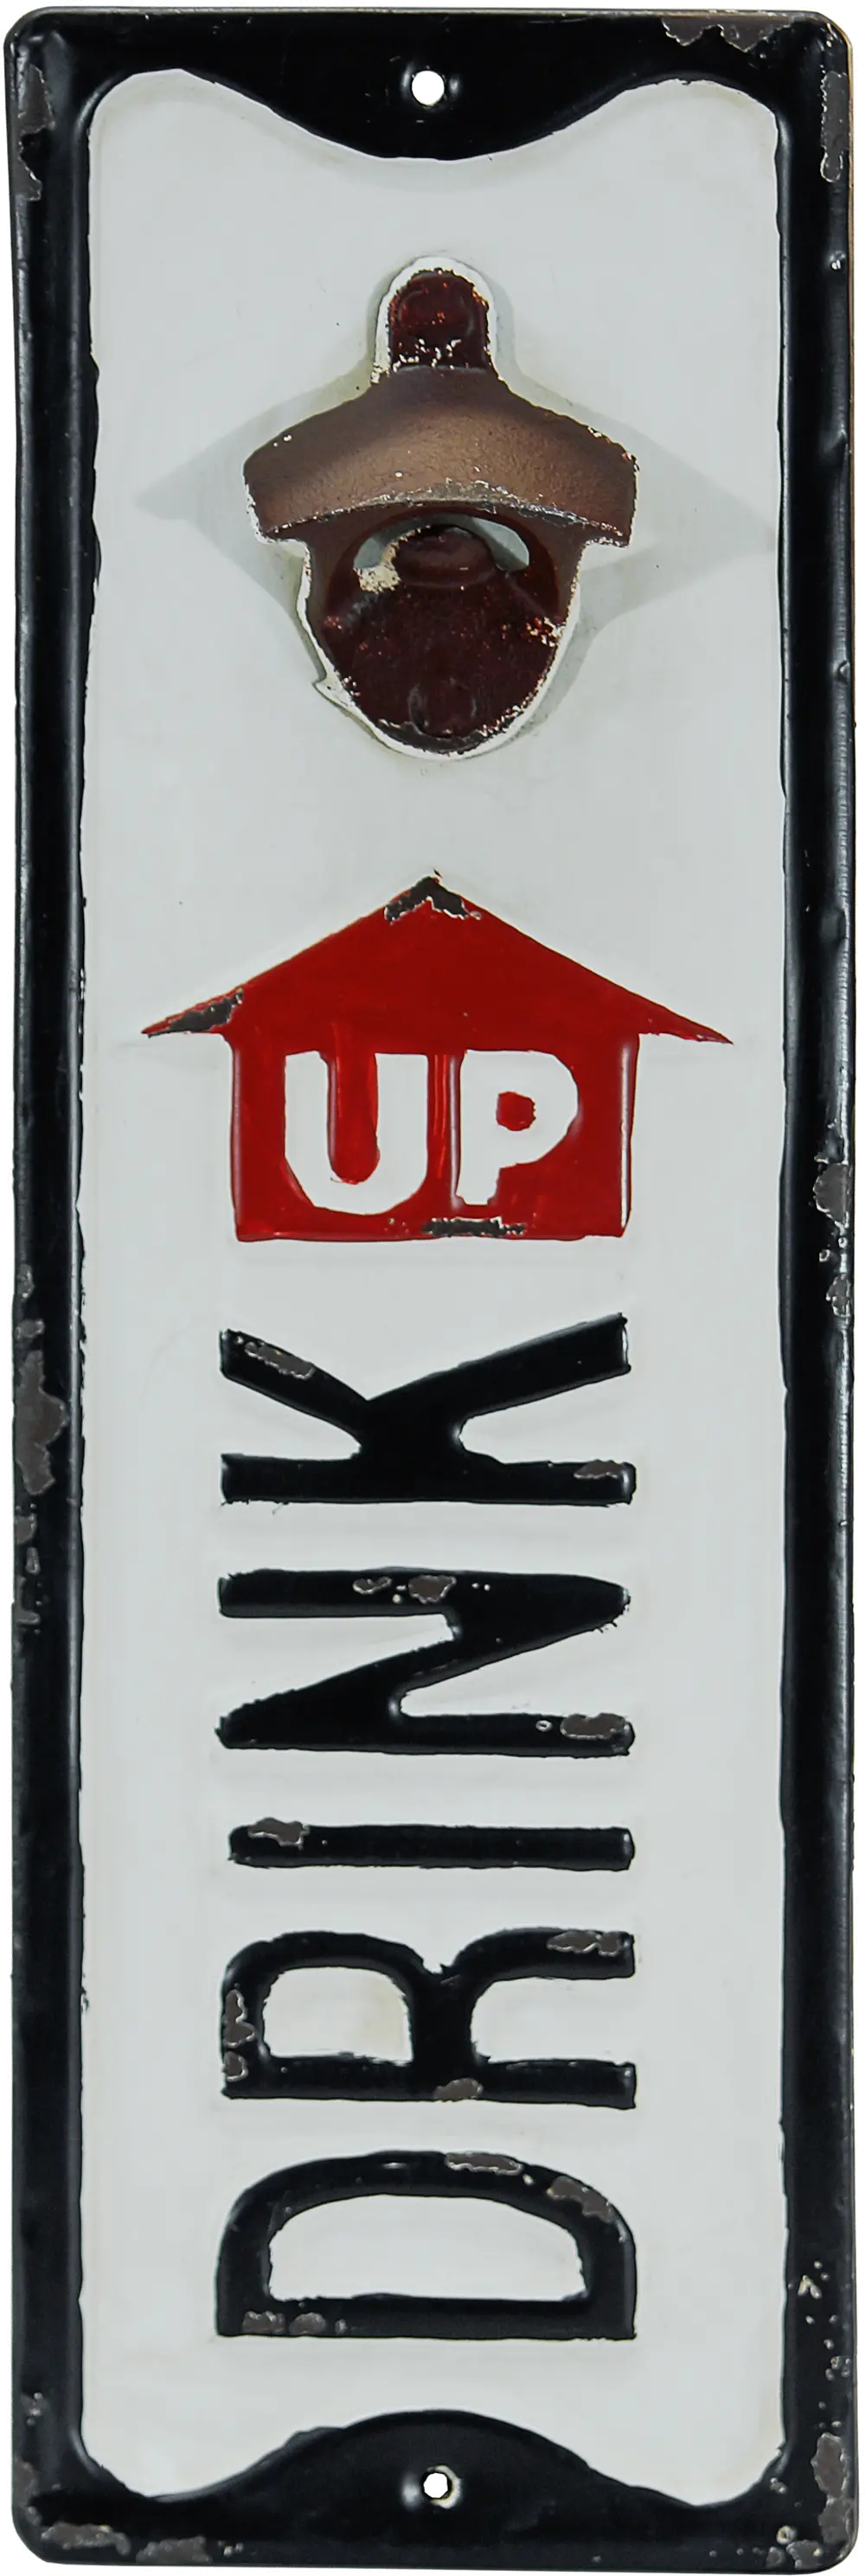 White, Black and Red Metal Drink Up Bottle Opener Wall Sign-1